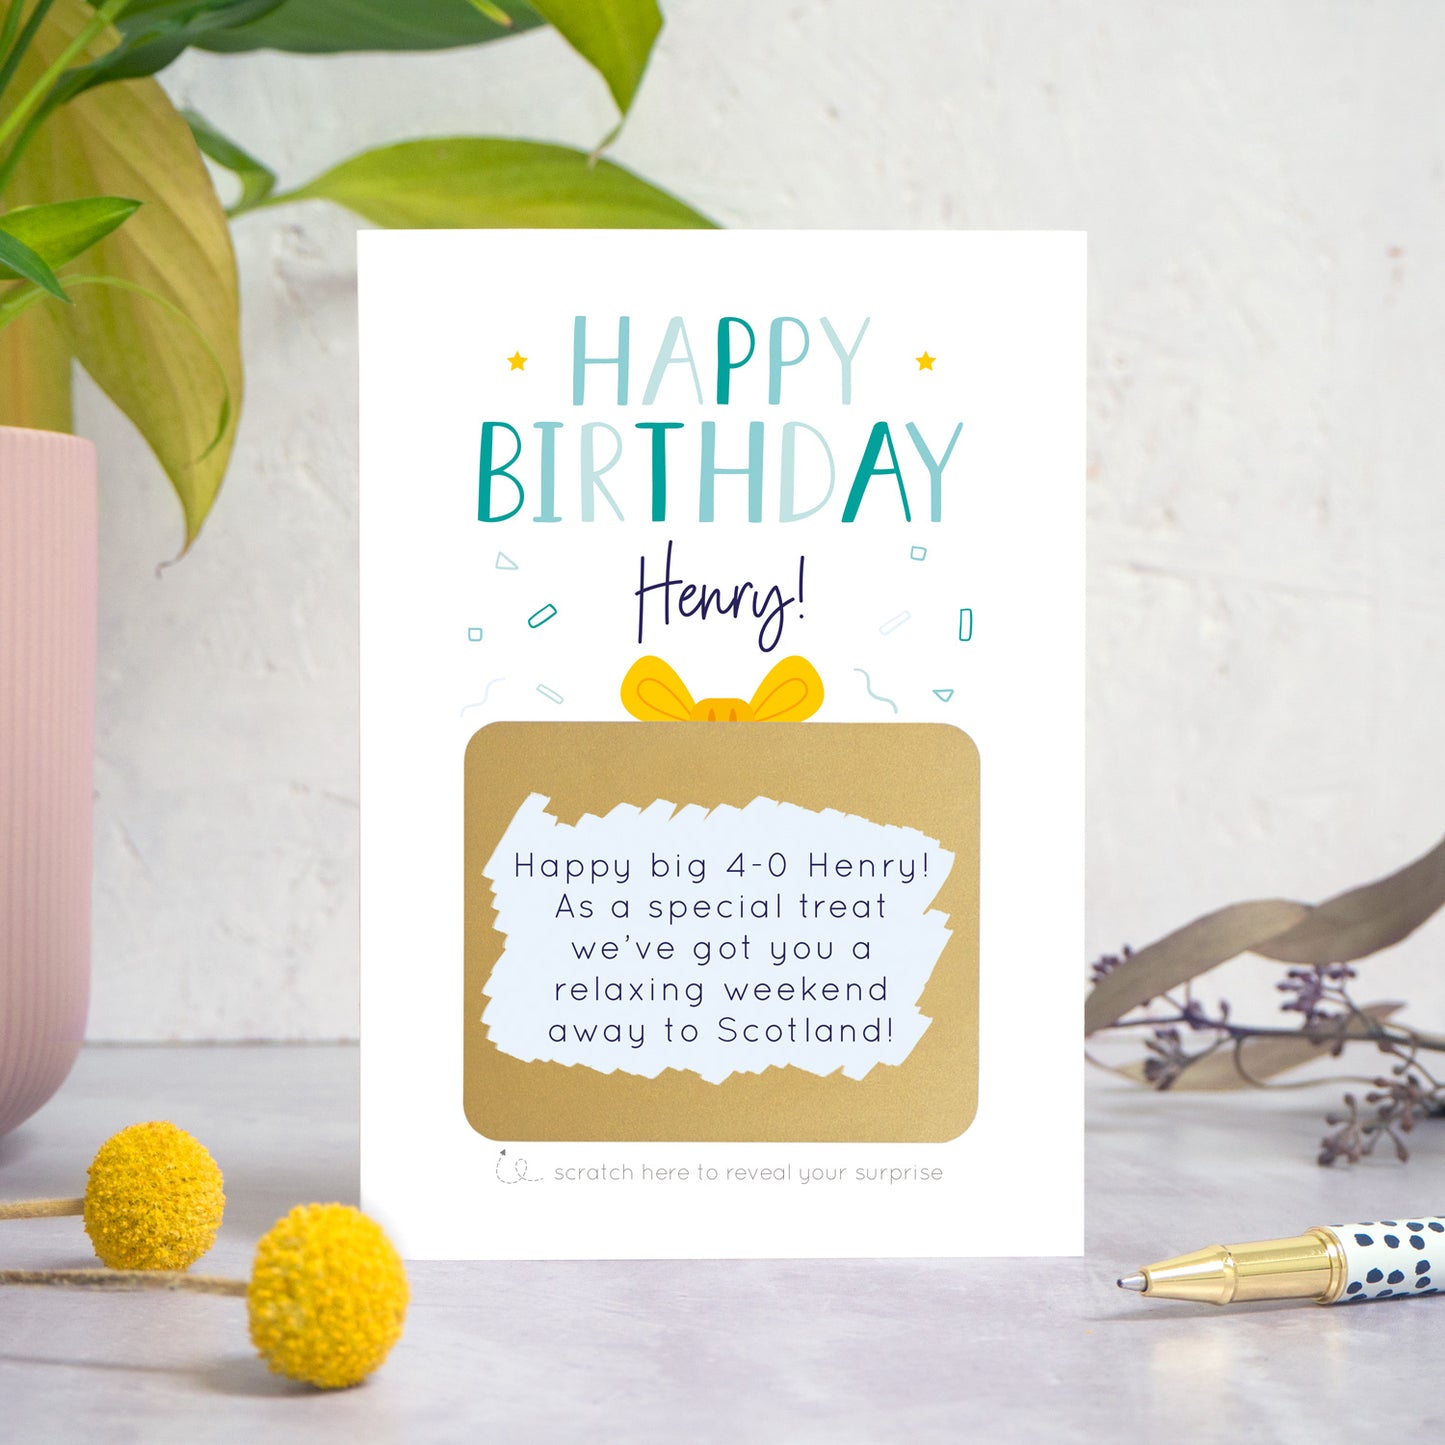 A personalised happy birthday scratch card in blue that has been photographed on a white and grey background with foliage and a pen in both the foreground and background. The card features the recipients name and a scratch panel that has been scratched off revealing a personalised message.